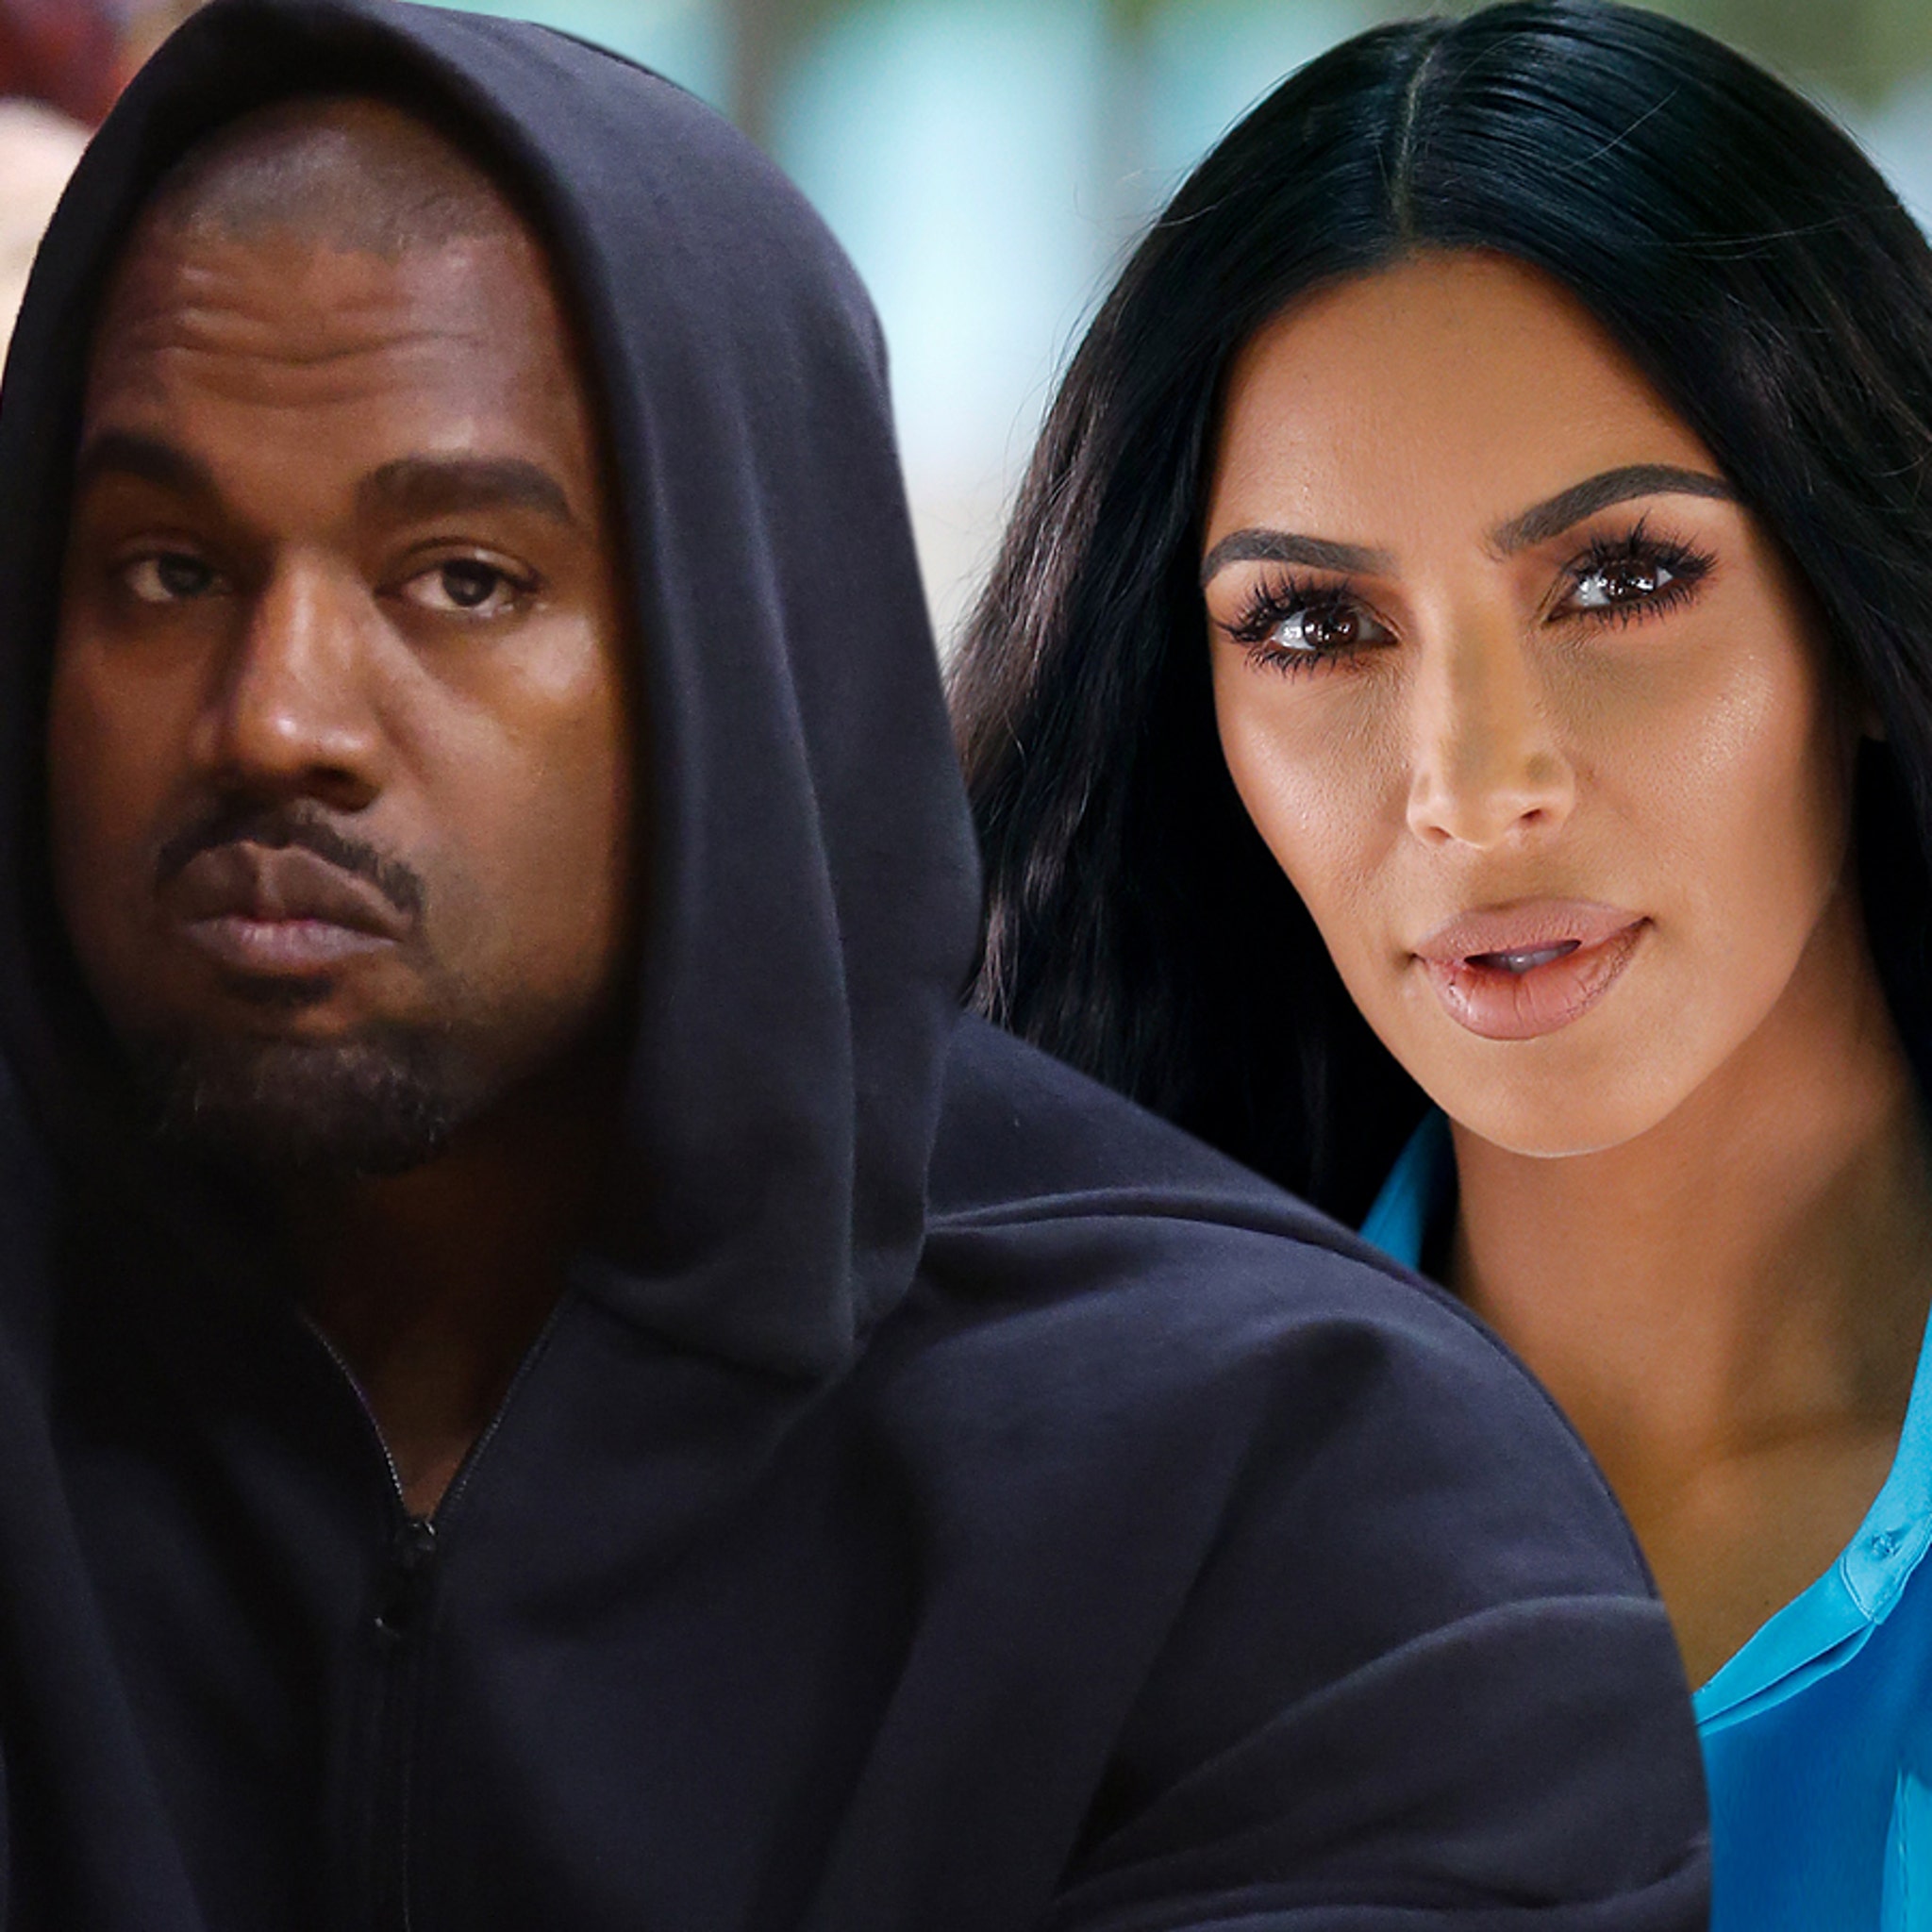 Night Sex Sleeping Porn Downlod - Kanye West Goes After Kim Kardashian and Family, Calls Himself a Sperm Donor